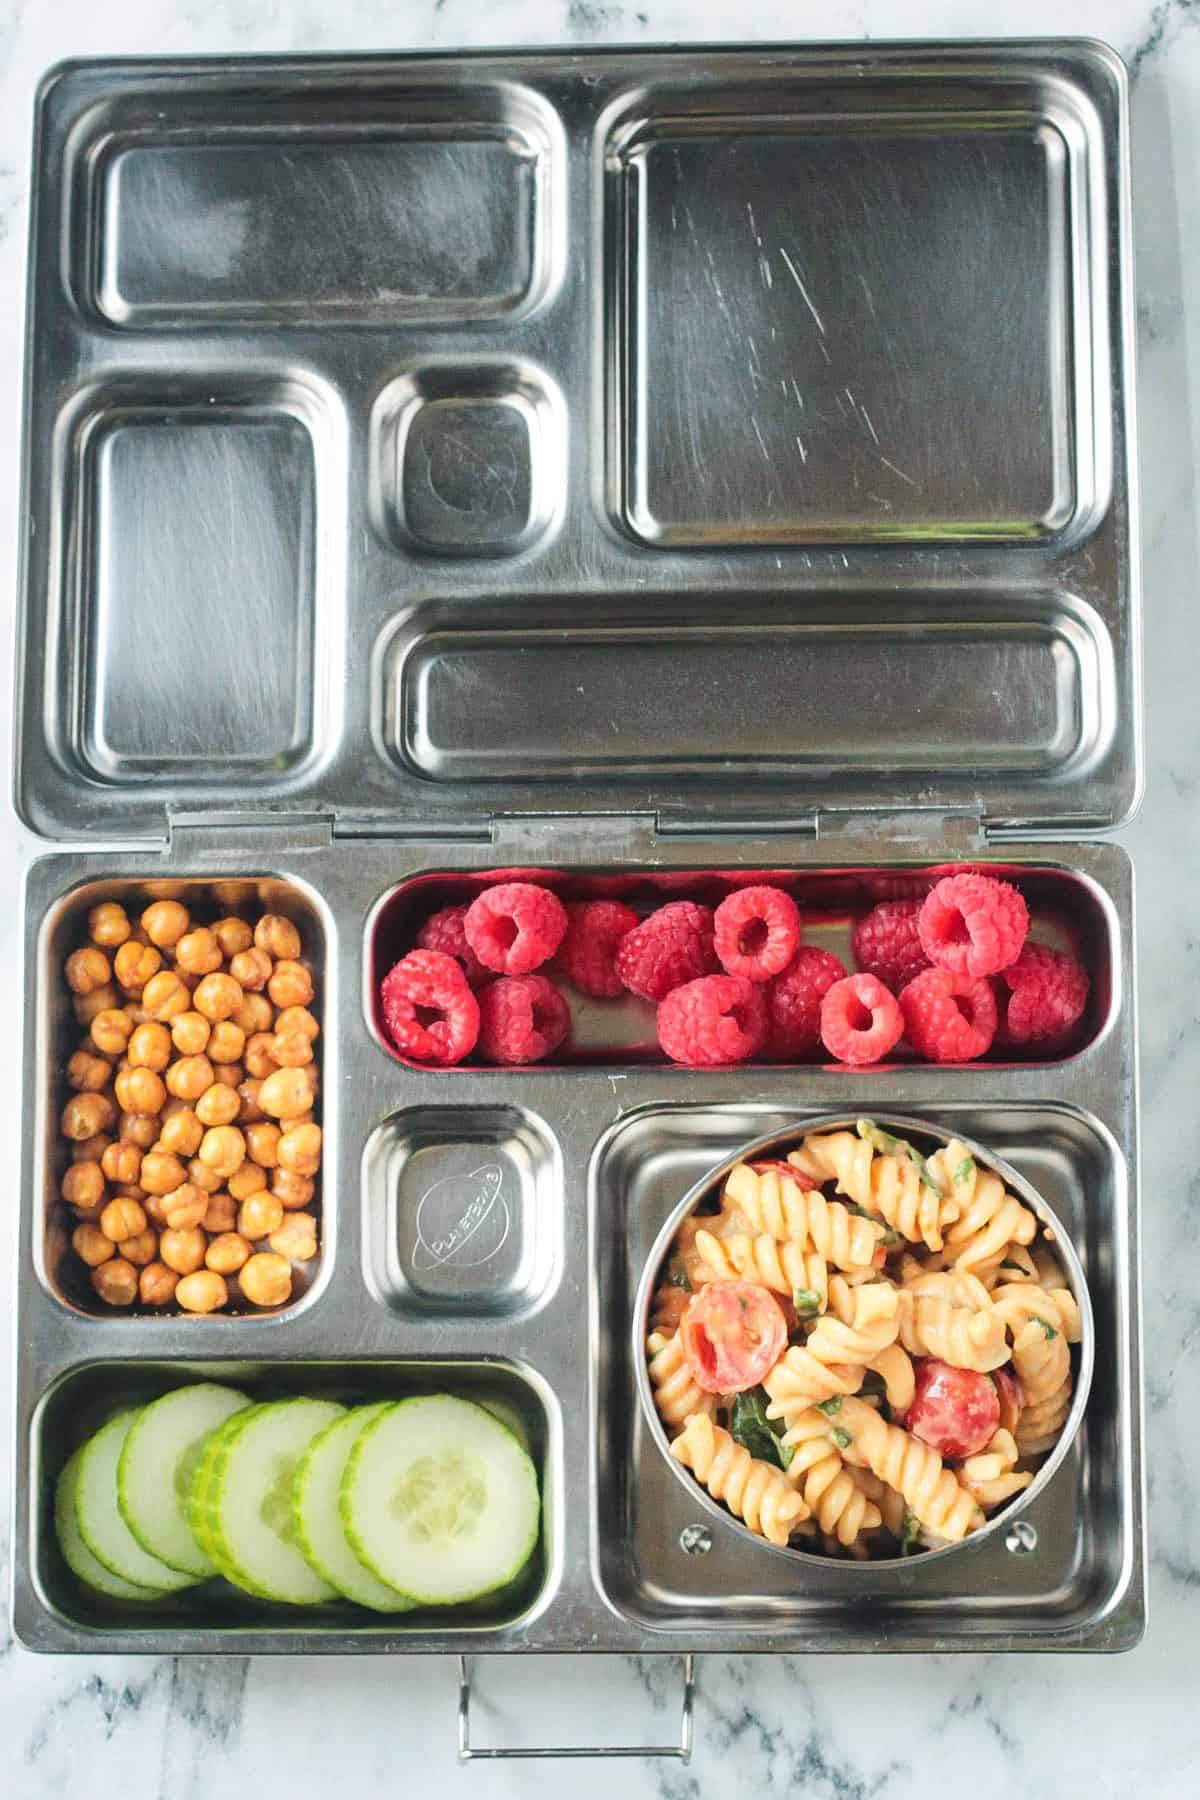 Bento style lunchbox with pasta salad, cucumbers, chickpeas, and raspberries.